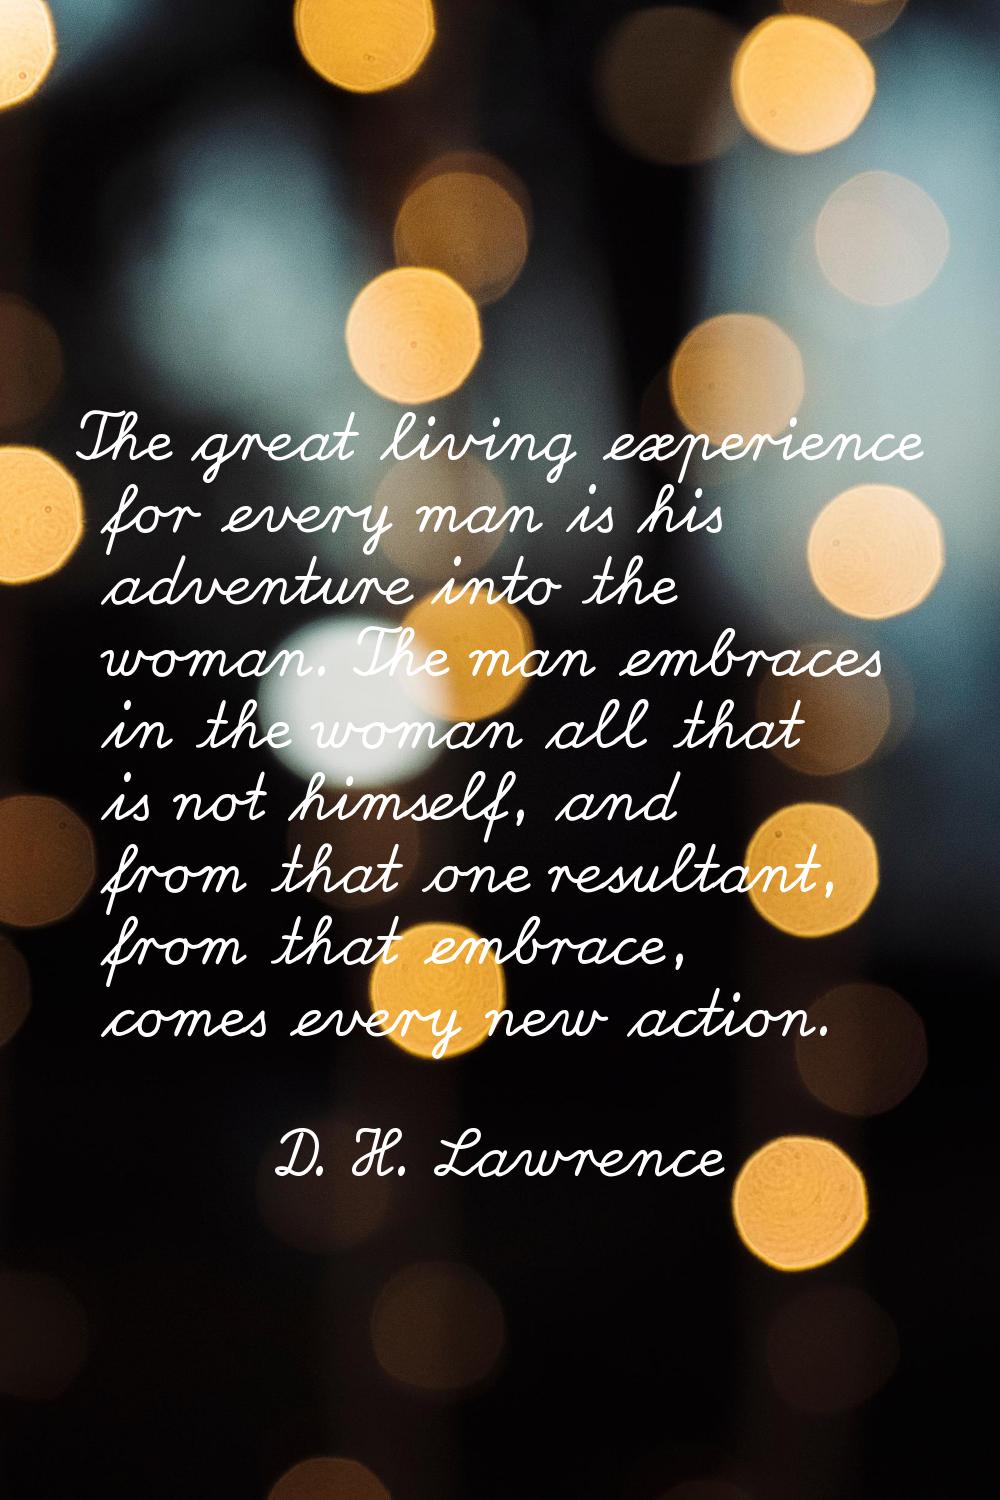 The great living experience for every man is his adventure into the woman. The man embraces in the 